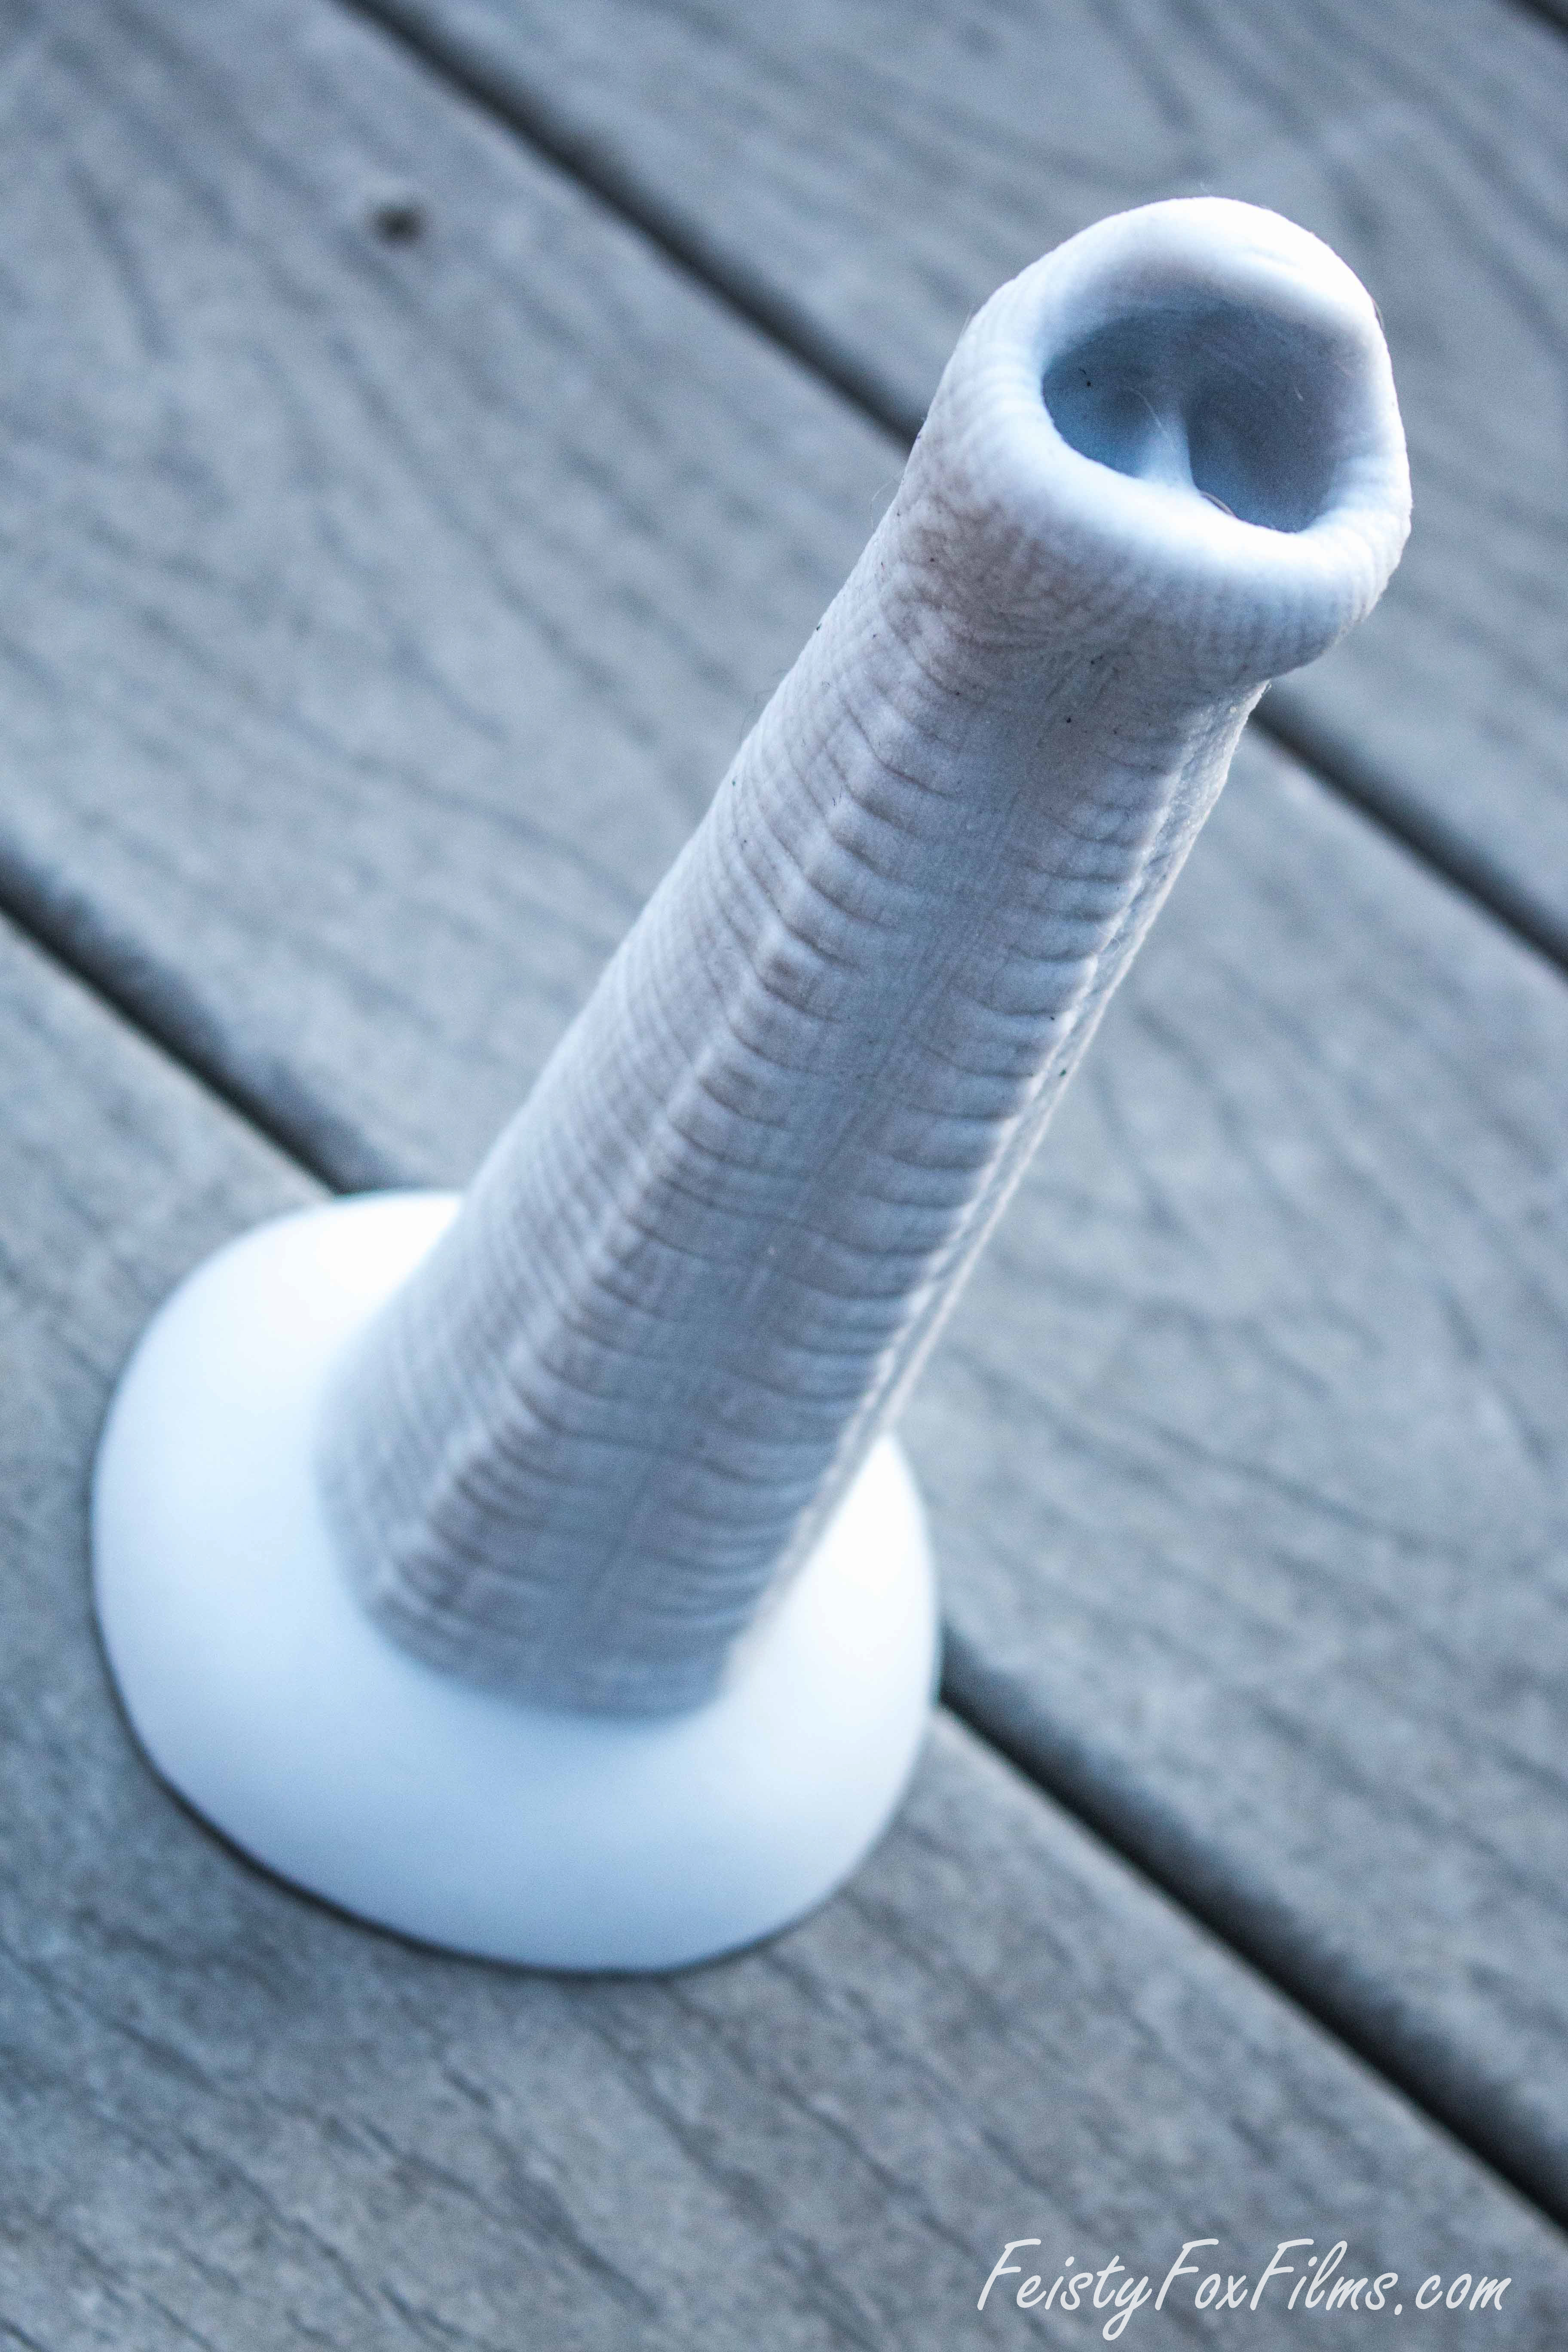 Exotic Erotics Elephant Trunk dildo lying on a wooden deck. It is lying diagonal from the bottom left to the upper right corner, showing the deep indents in the nose